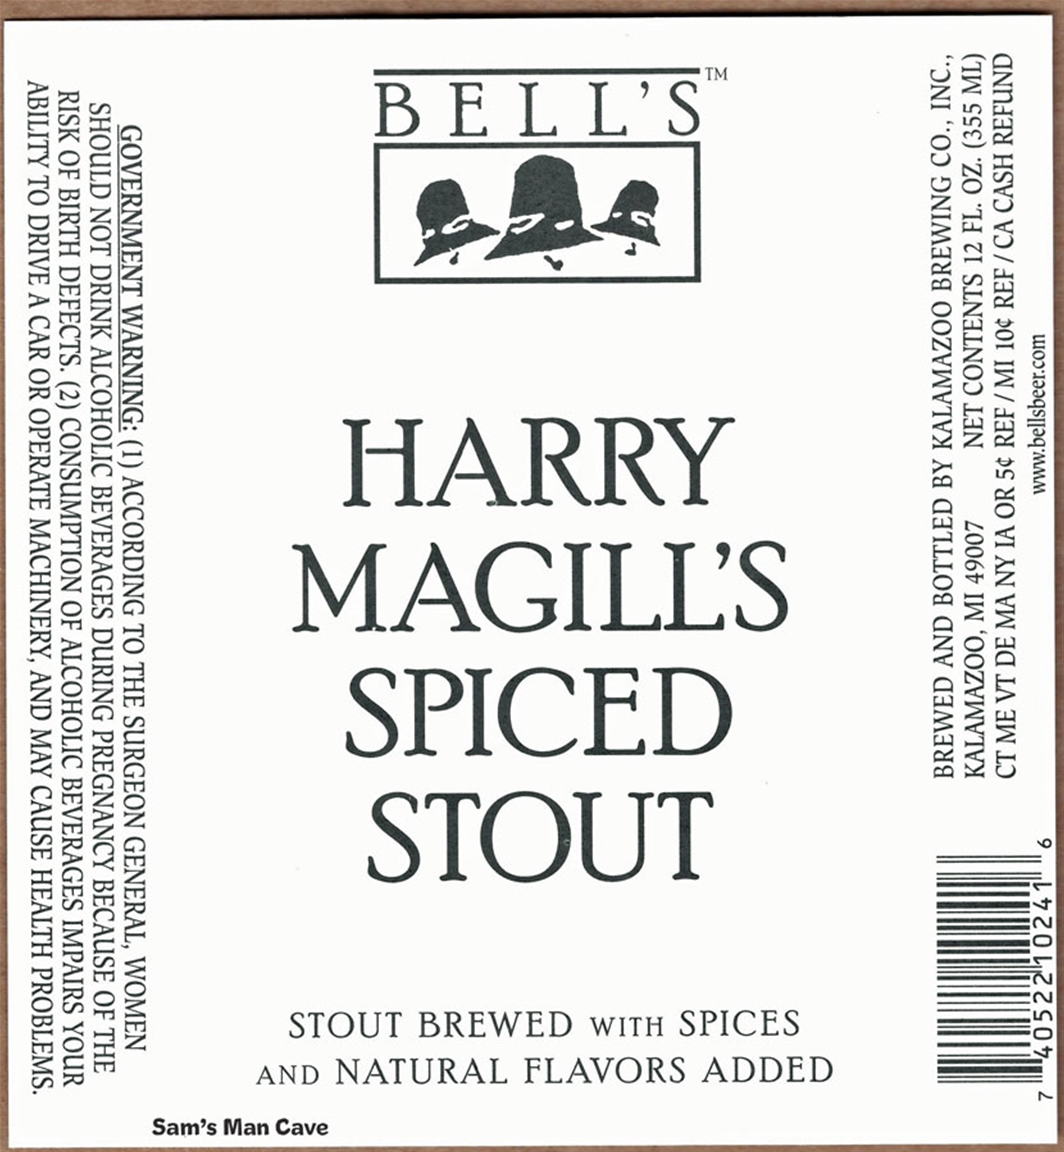 Bell's Harry Magill's Spiced Stout Label